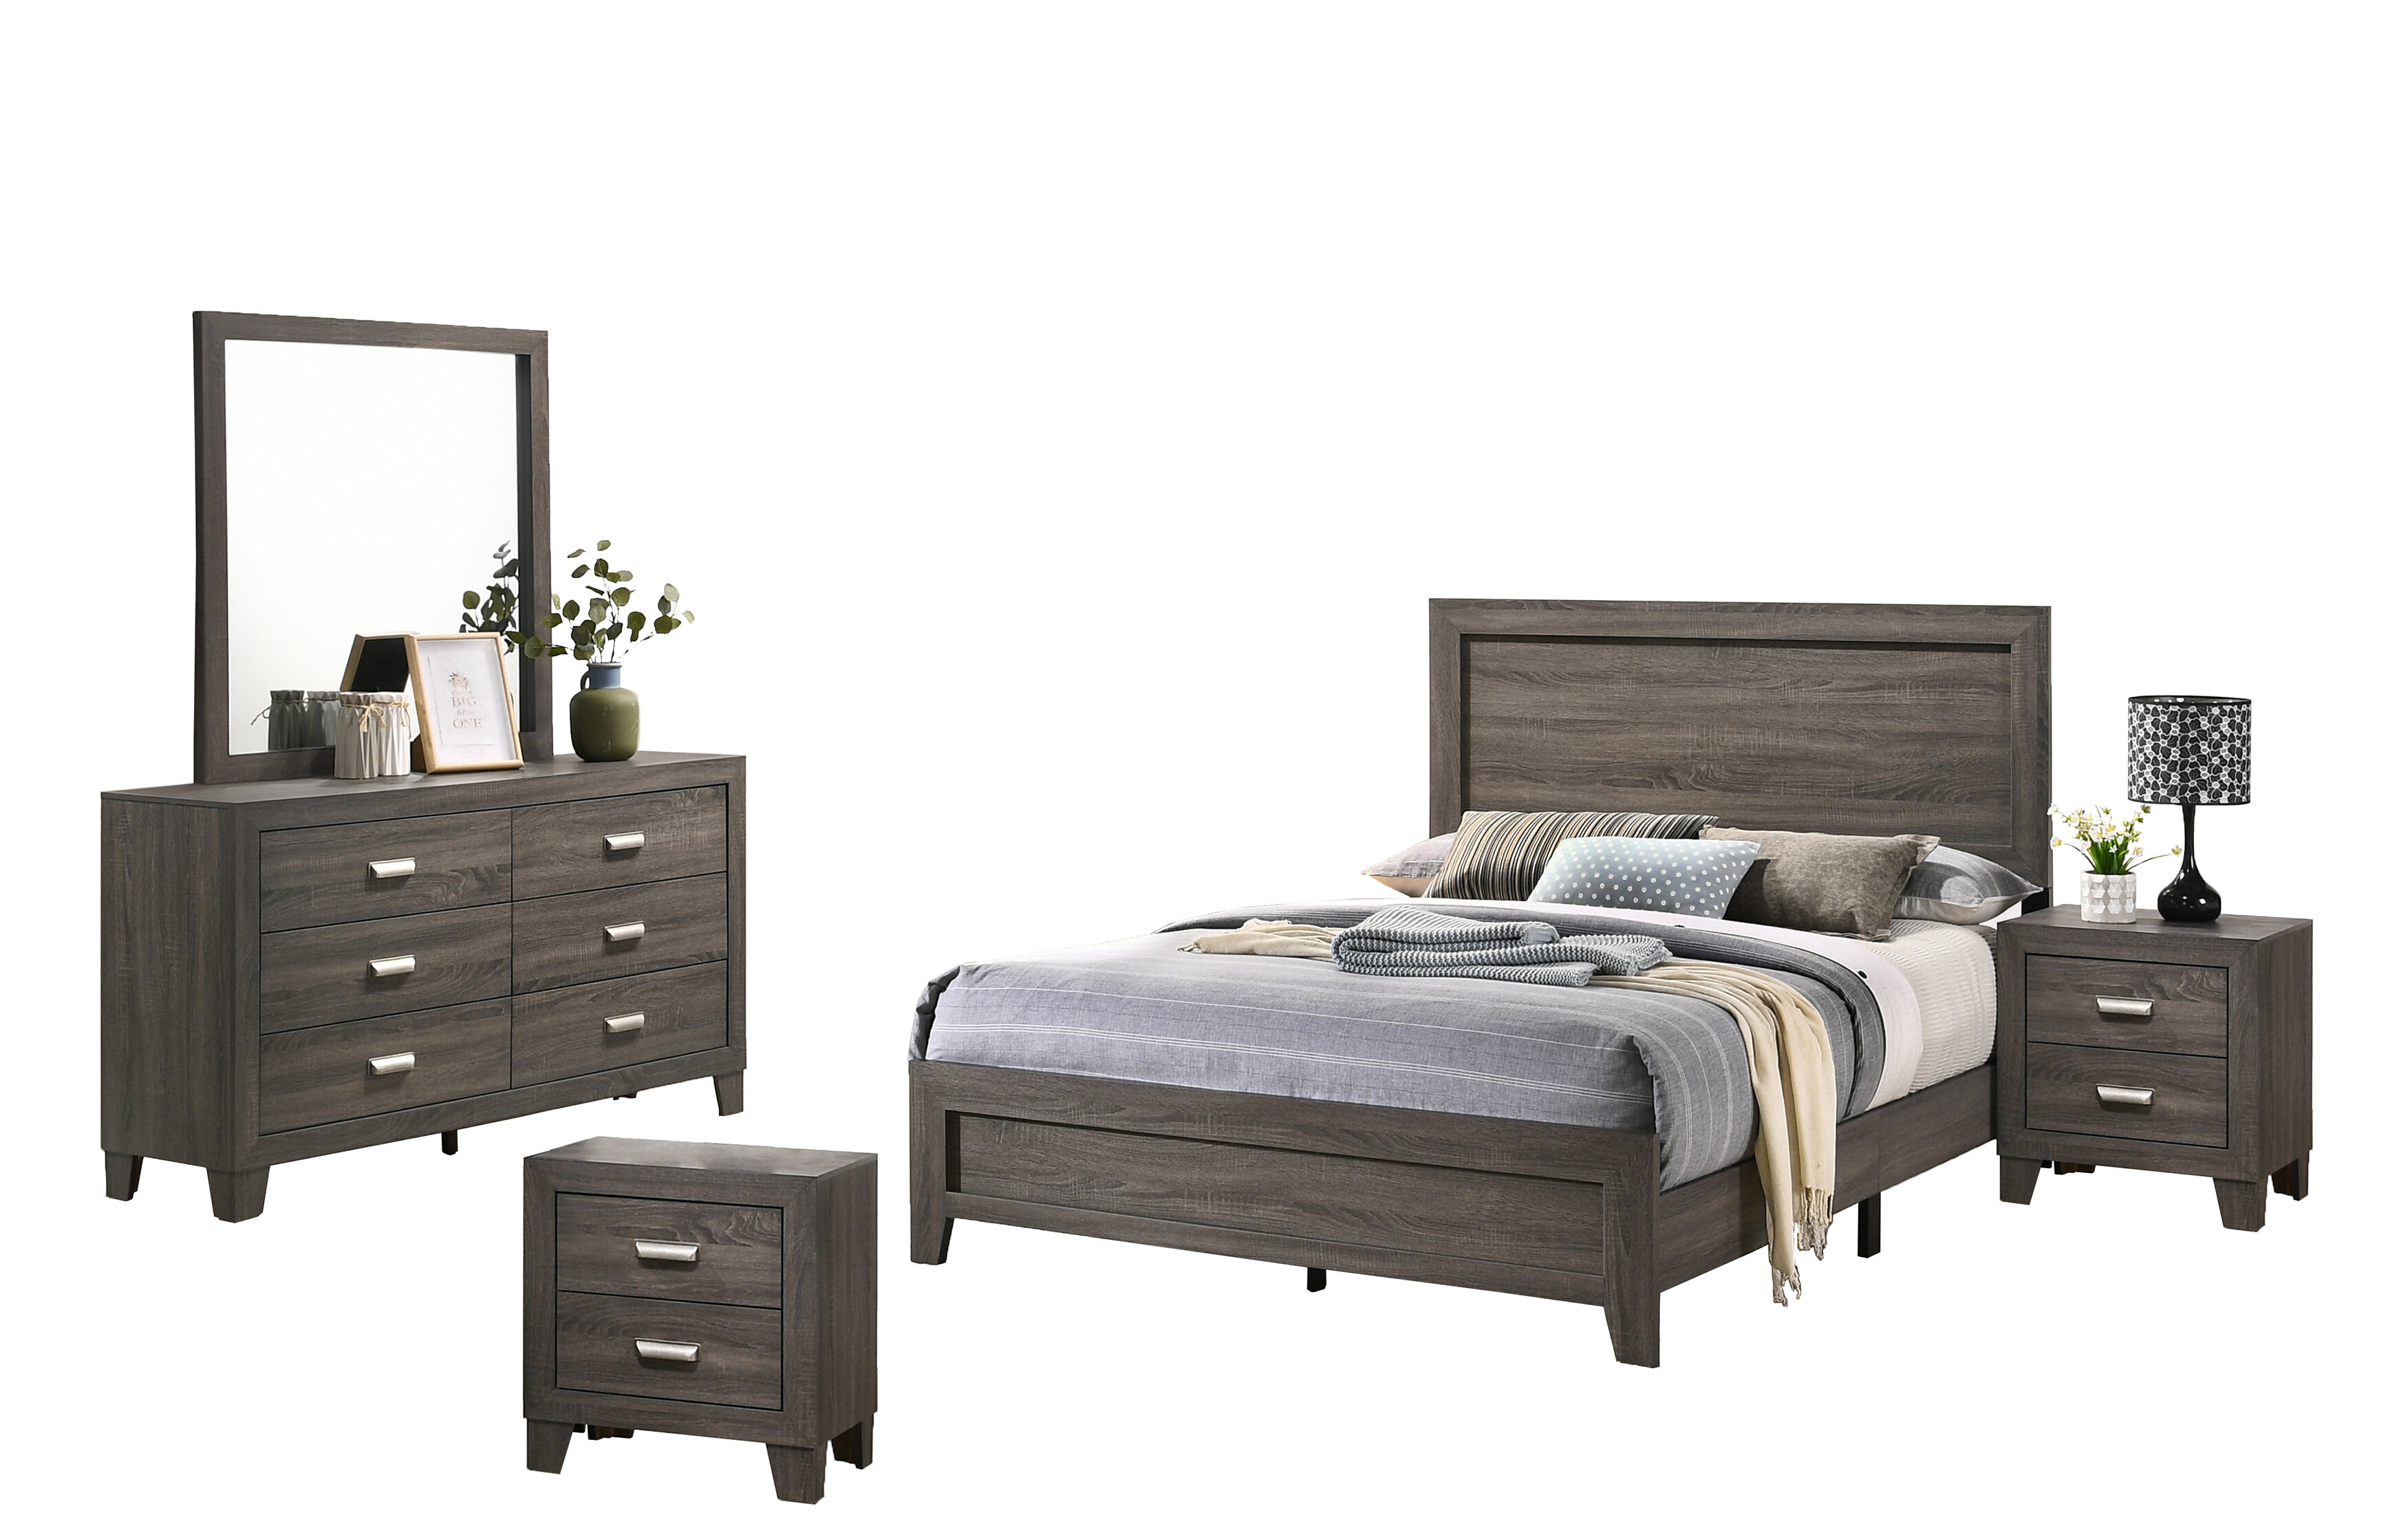 Wood Bedroom Sets Free Shipping Over 35 Wayfair